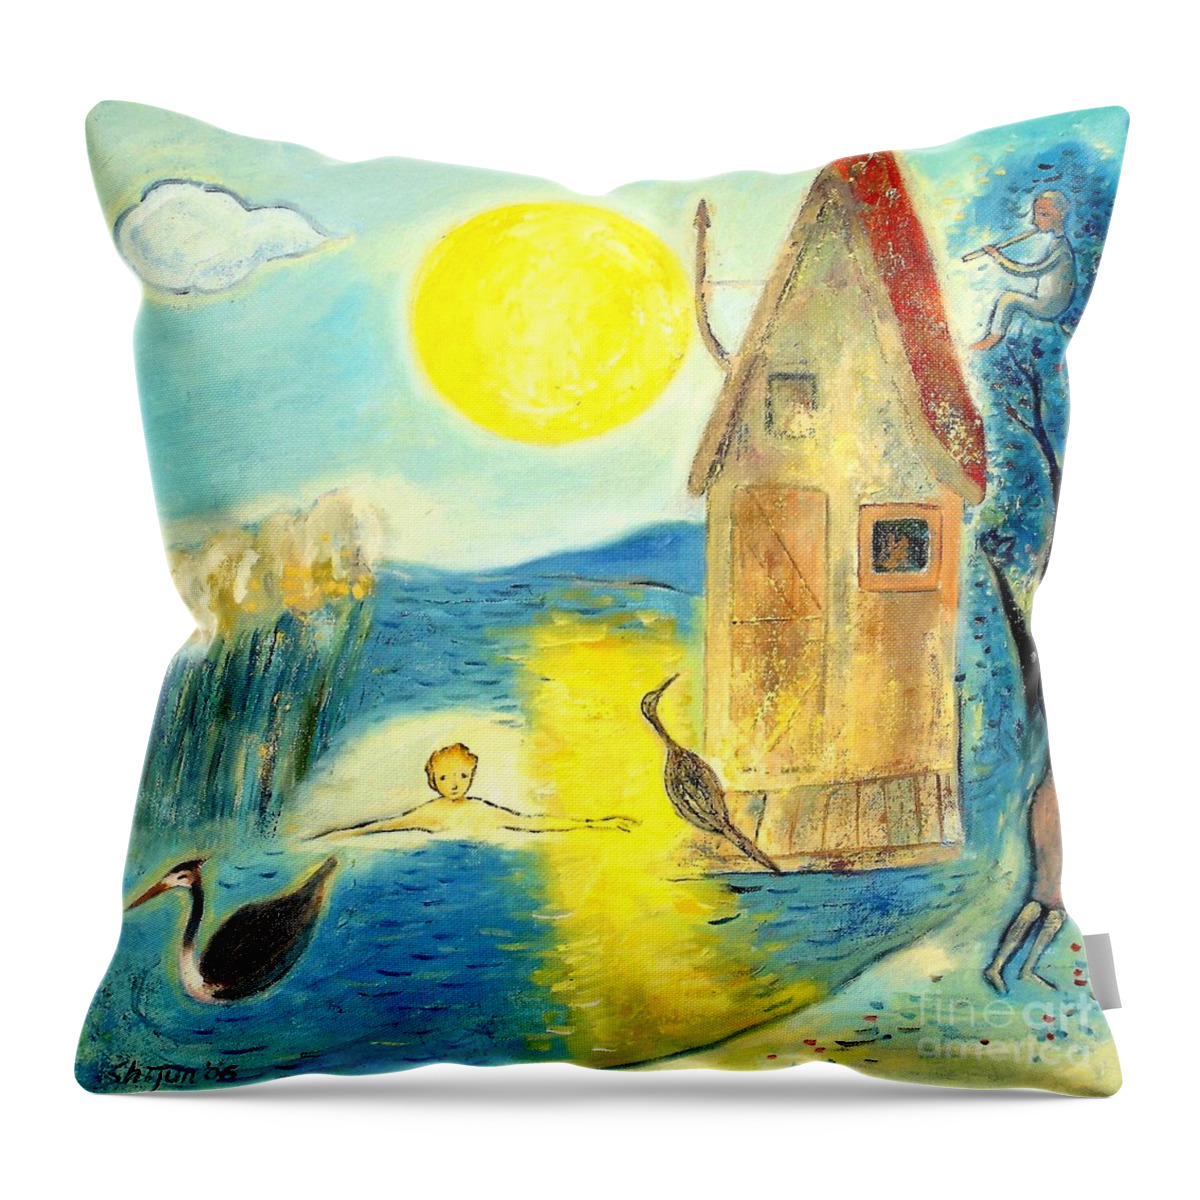 Landscape Throw Pillow featuring the painting Sunset by Shijun Munns